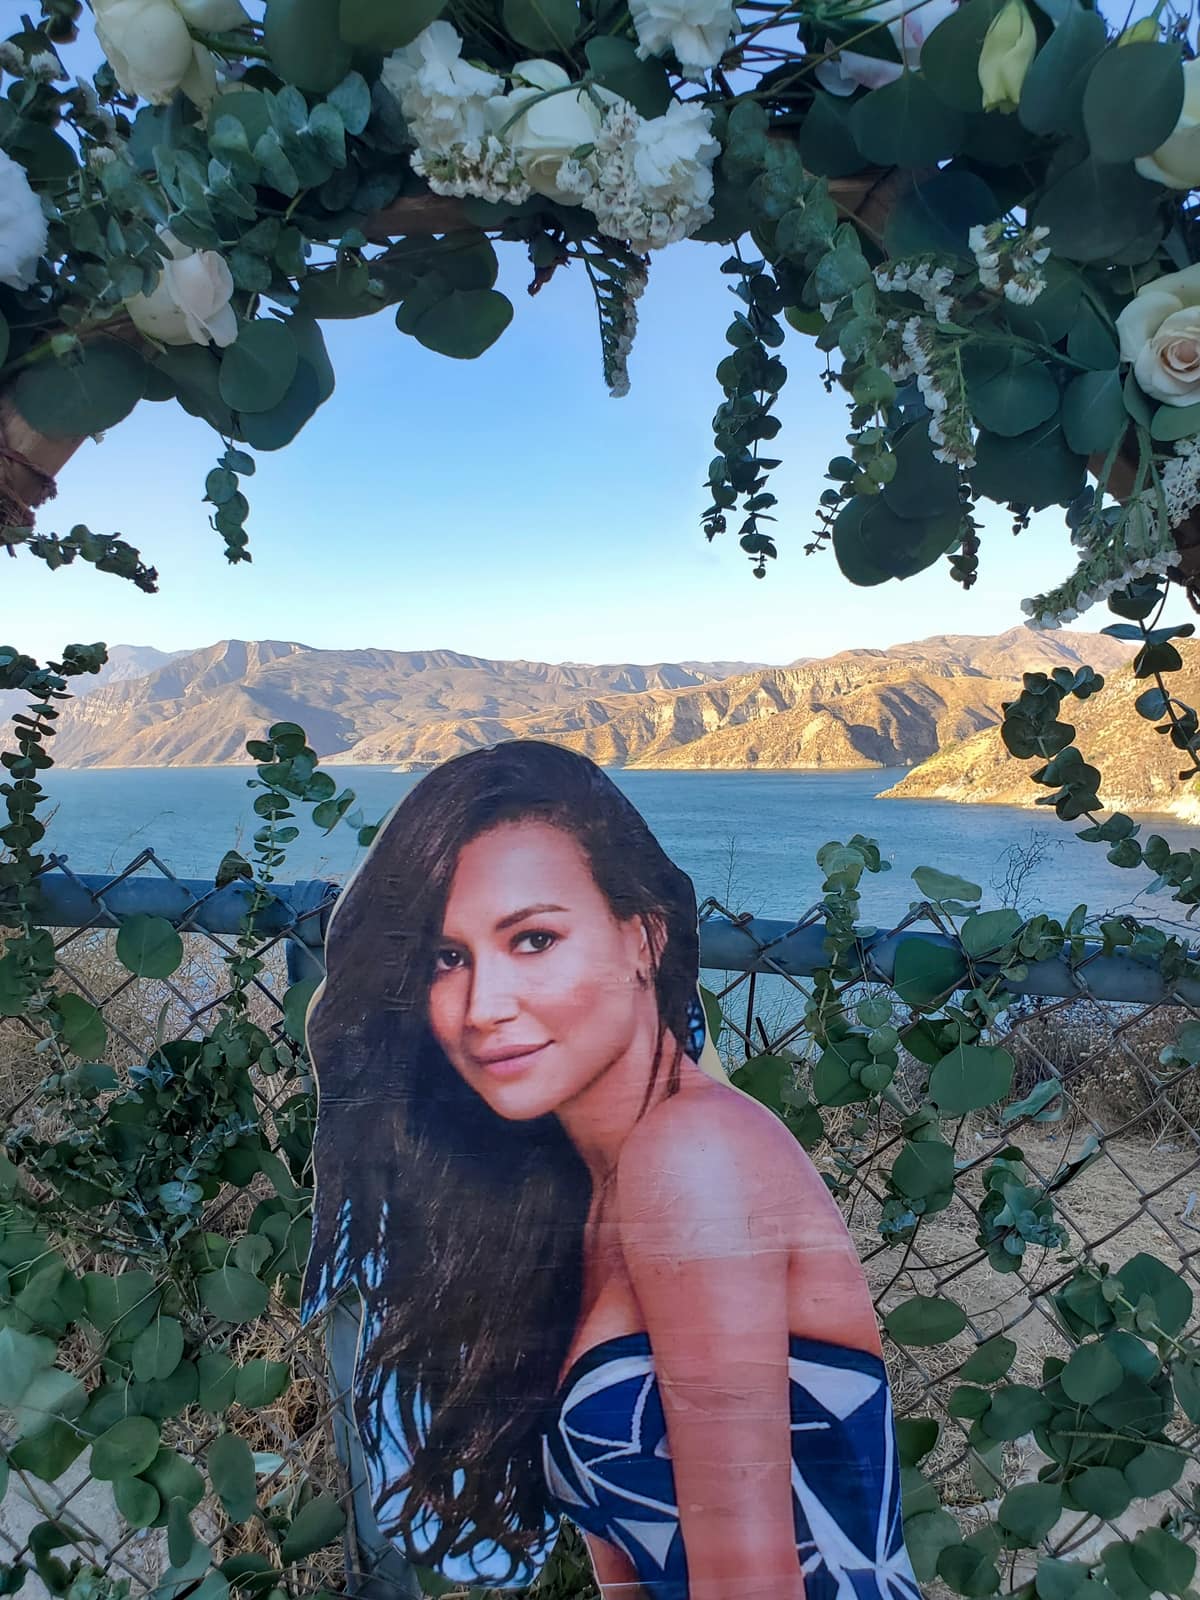 A memorial for Naya Rivera at Lake Piru, where she died in 2020 during a boating trip with her 4-year-old son